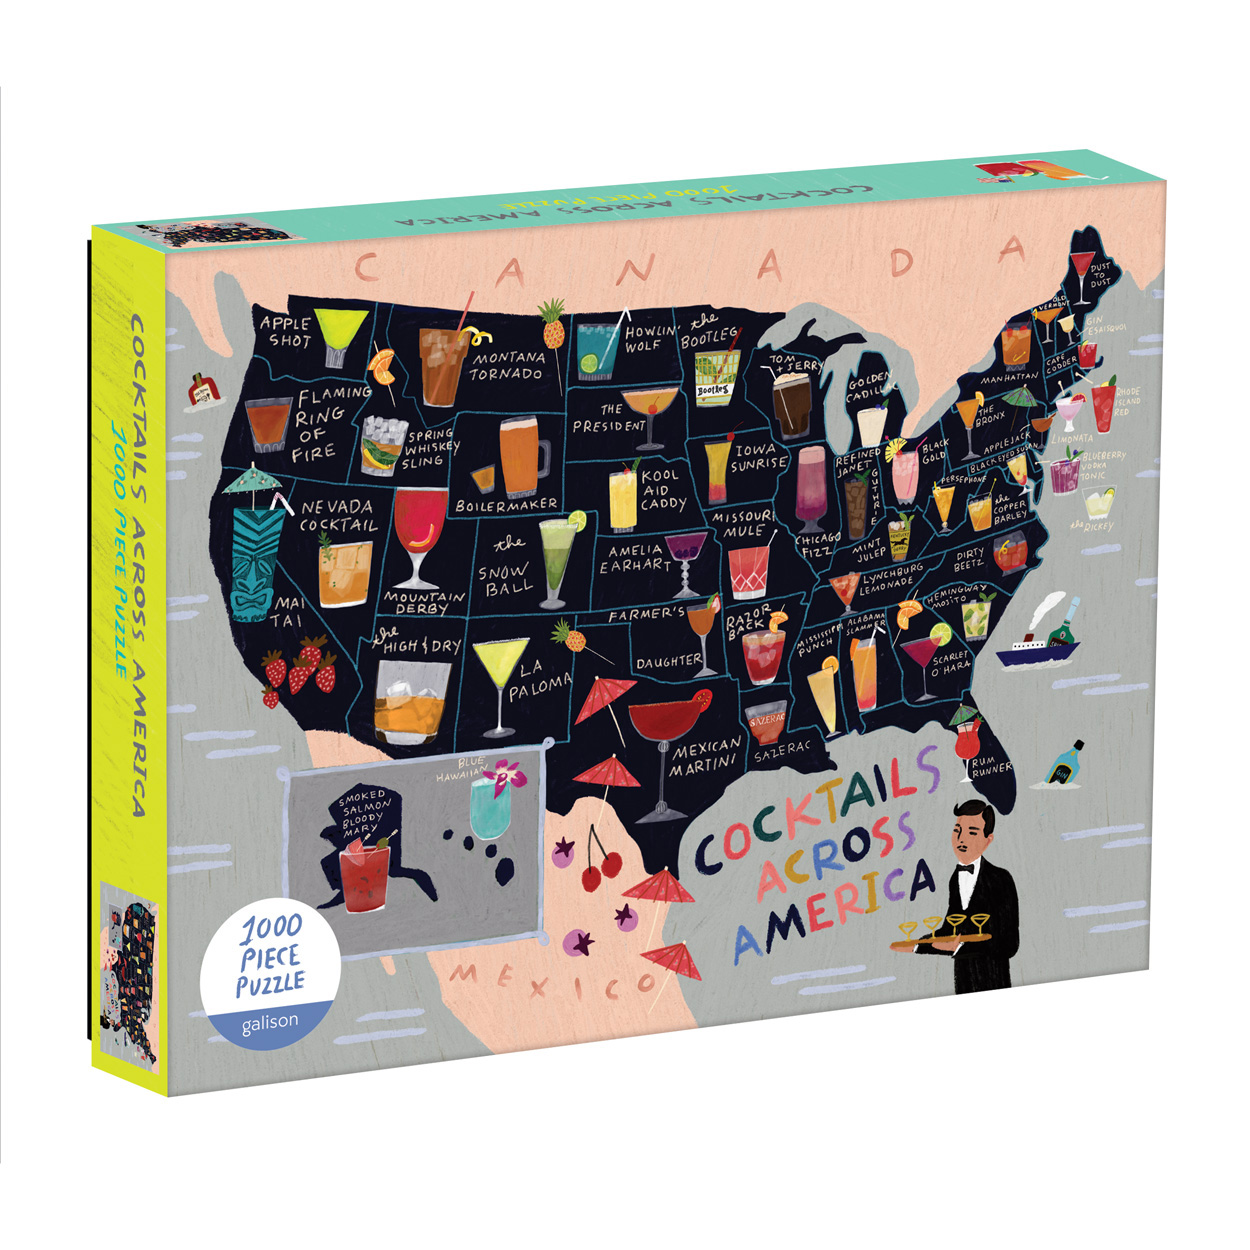 Cocktail Map Of The USA 1000 Piece Puzzle - Galison